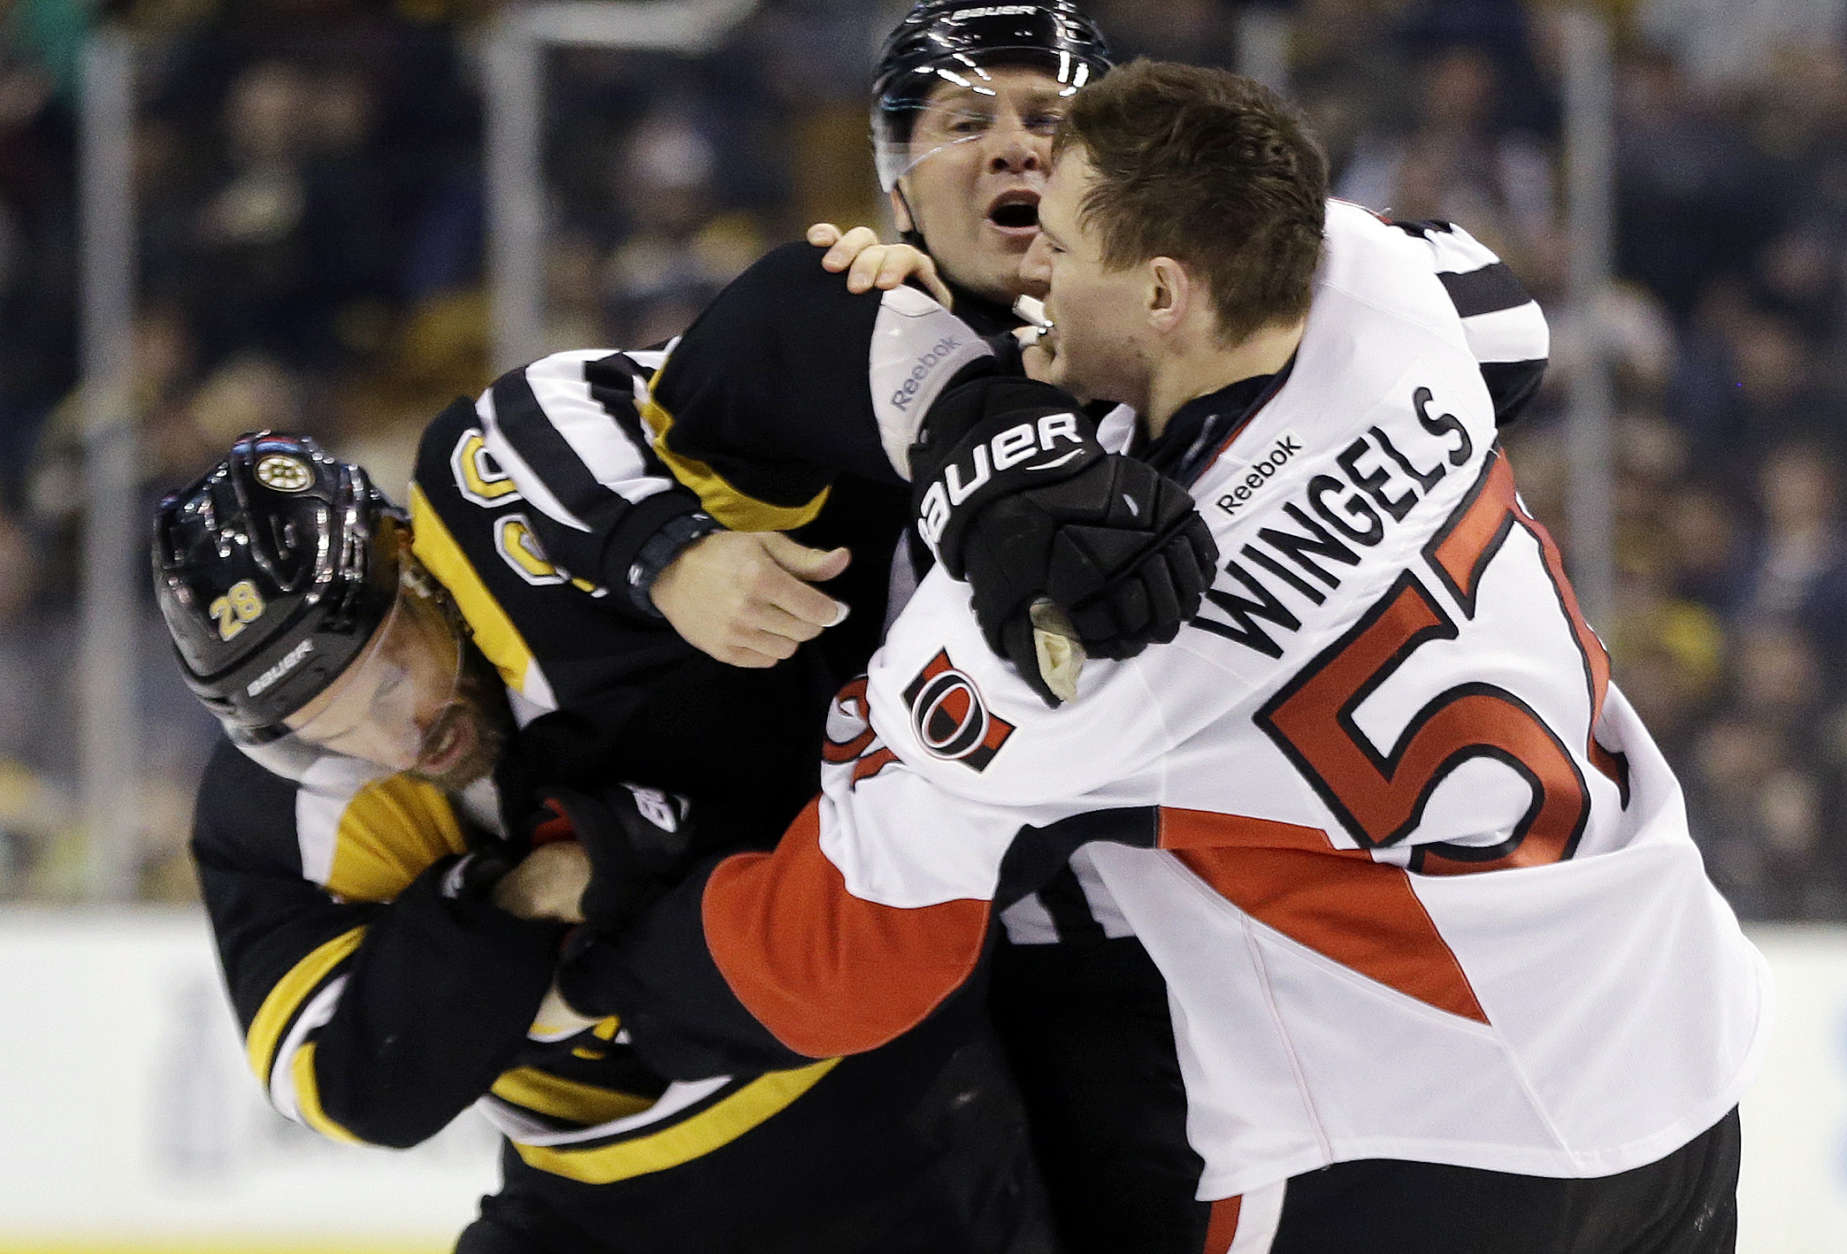 Boston Bruins center Dominic Moore (28) and Ottawa Senators center Tommy Wingels (57) fight during the second period of an NHL hockey game, Thursday, April 6, 2017, in Boston. (AP Photo/Elise Amendola)